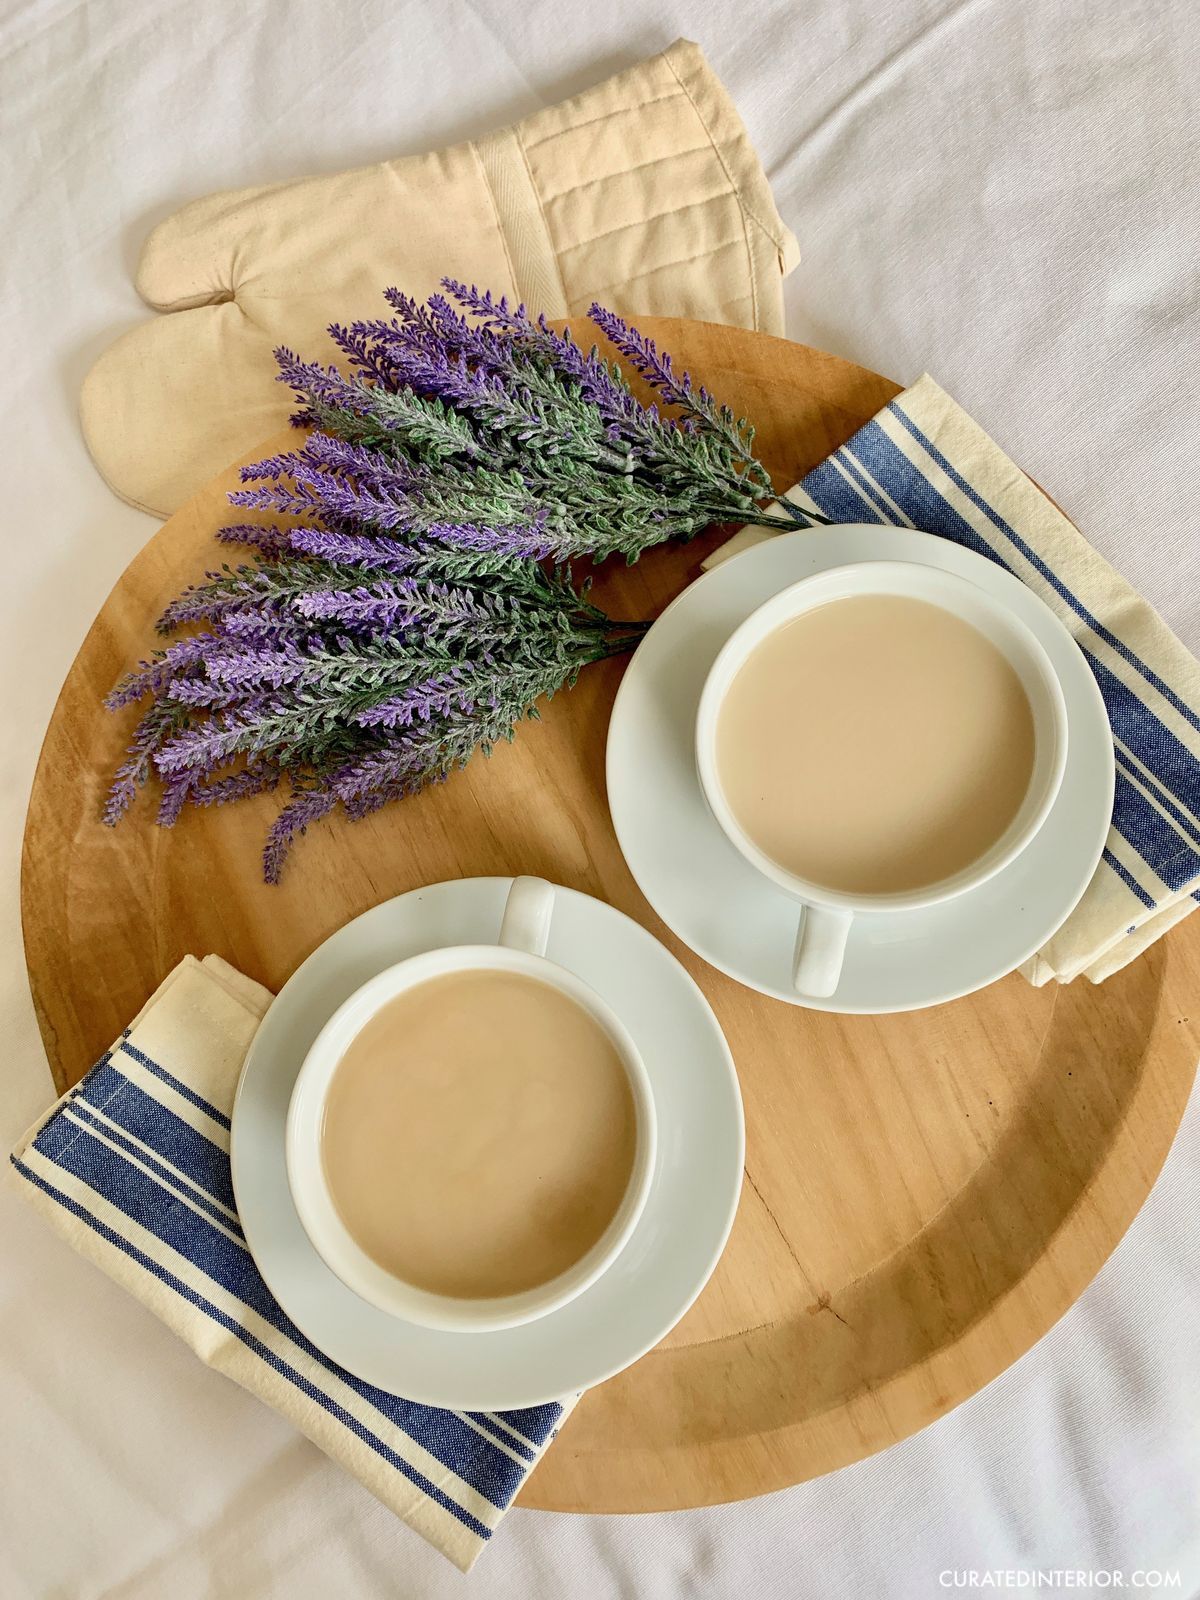 French country coffee bar essentials - oversized coffee cups and saucers, mango wood tray, blue and white striped napkins, lavender stems, and organic cotton oven mitt